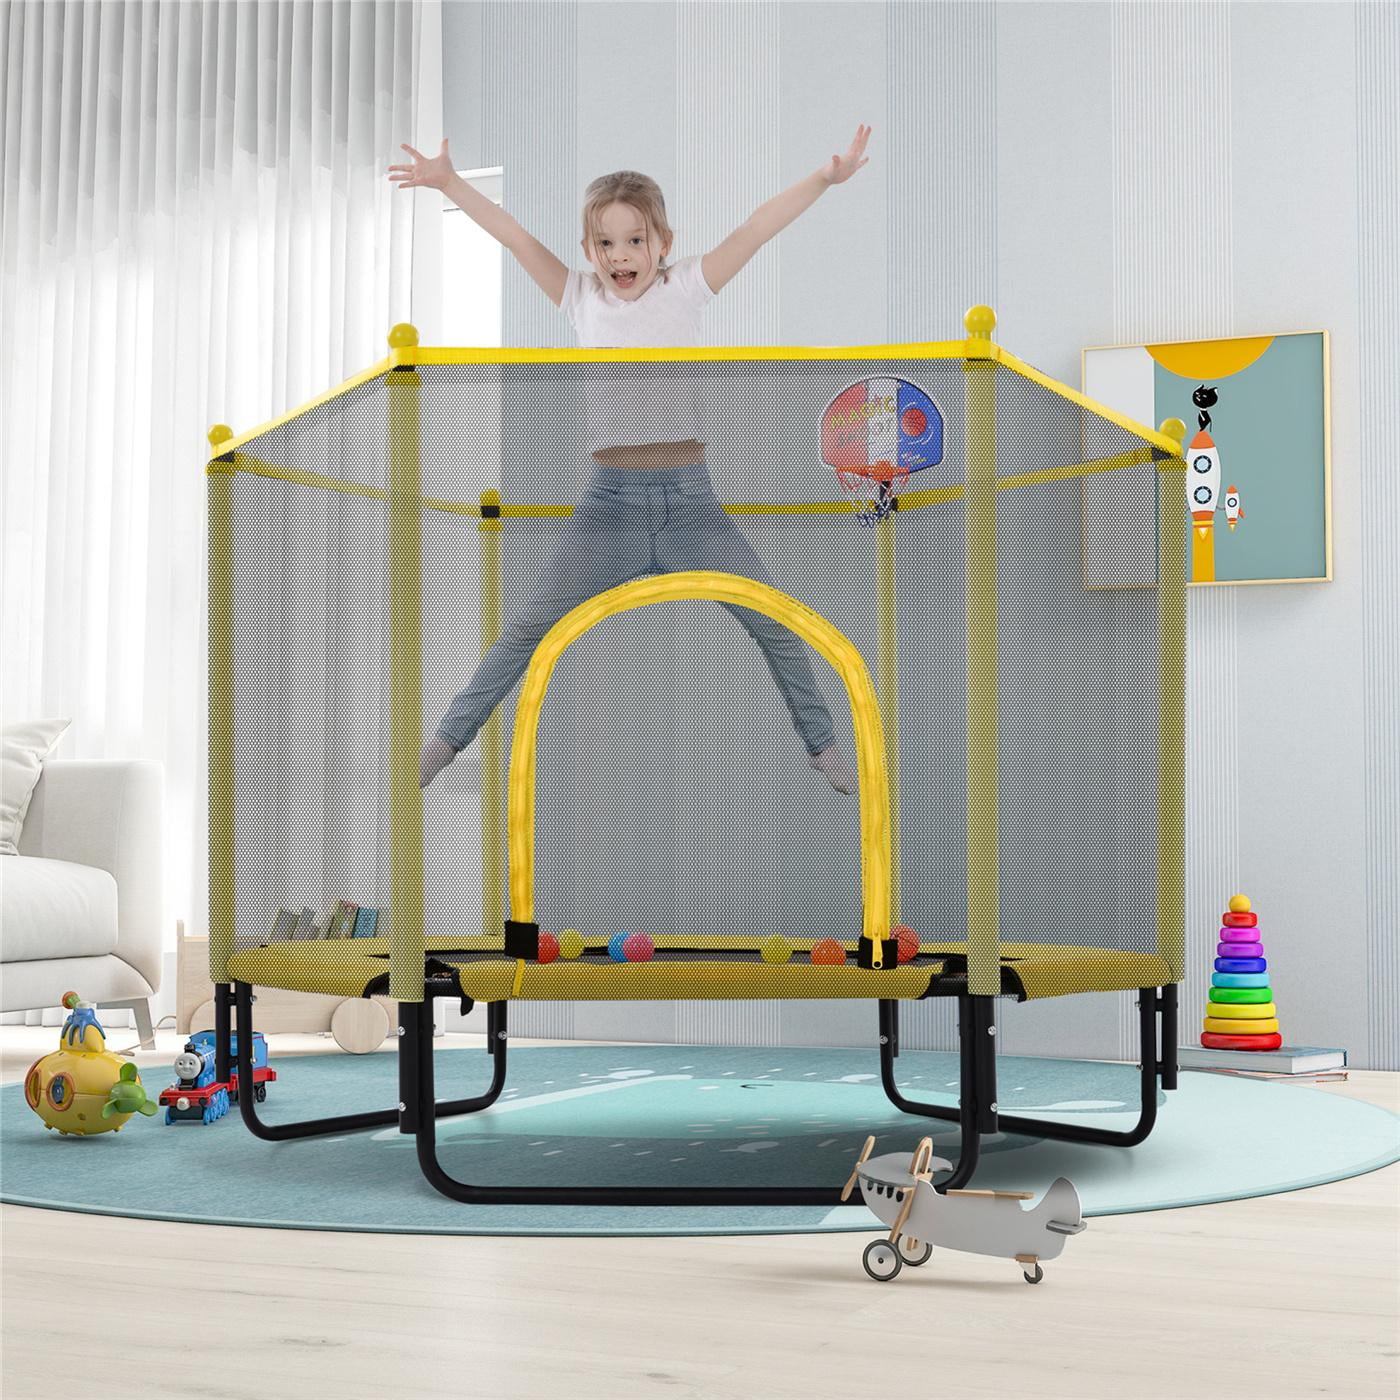 Mini Toddler Trampoline, 5FT Trampoline with Basketball Hoop for Fun, Indoor Outdoor Cardio Exercise Trampoline for Kids Max 200 LBS, Yellow